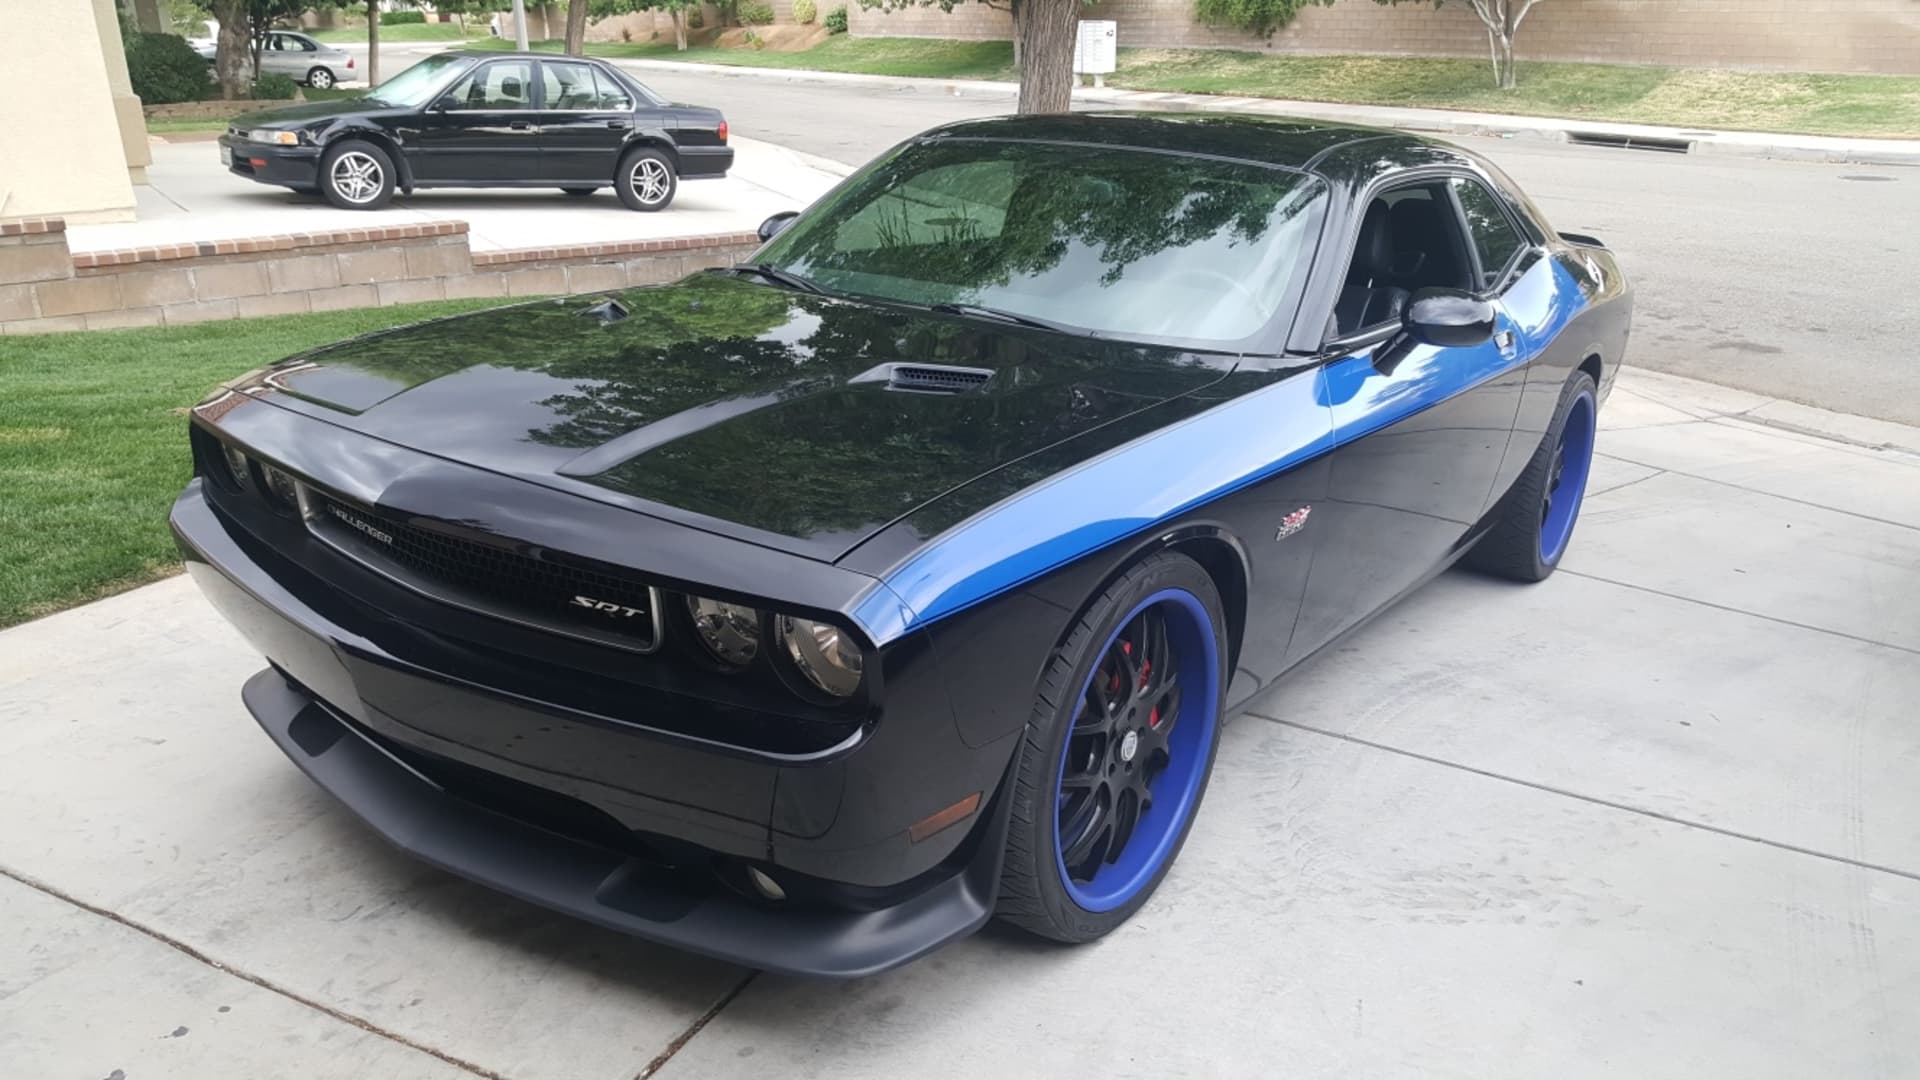 Krytzer's first big purchase, a brand new 2012 Dodge Challenger SRT8 couldn't have come at a better time. His last car had over 200,000 miles and was burning oil.